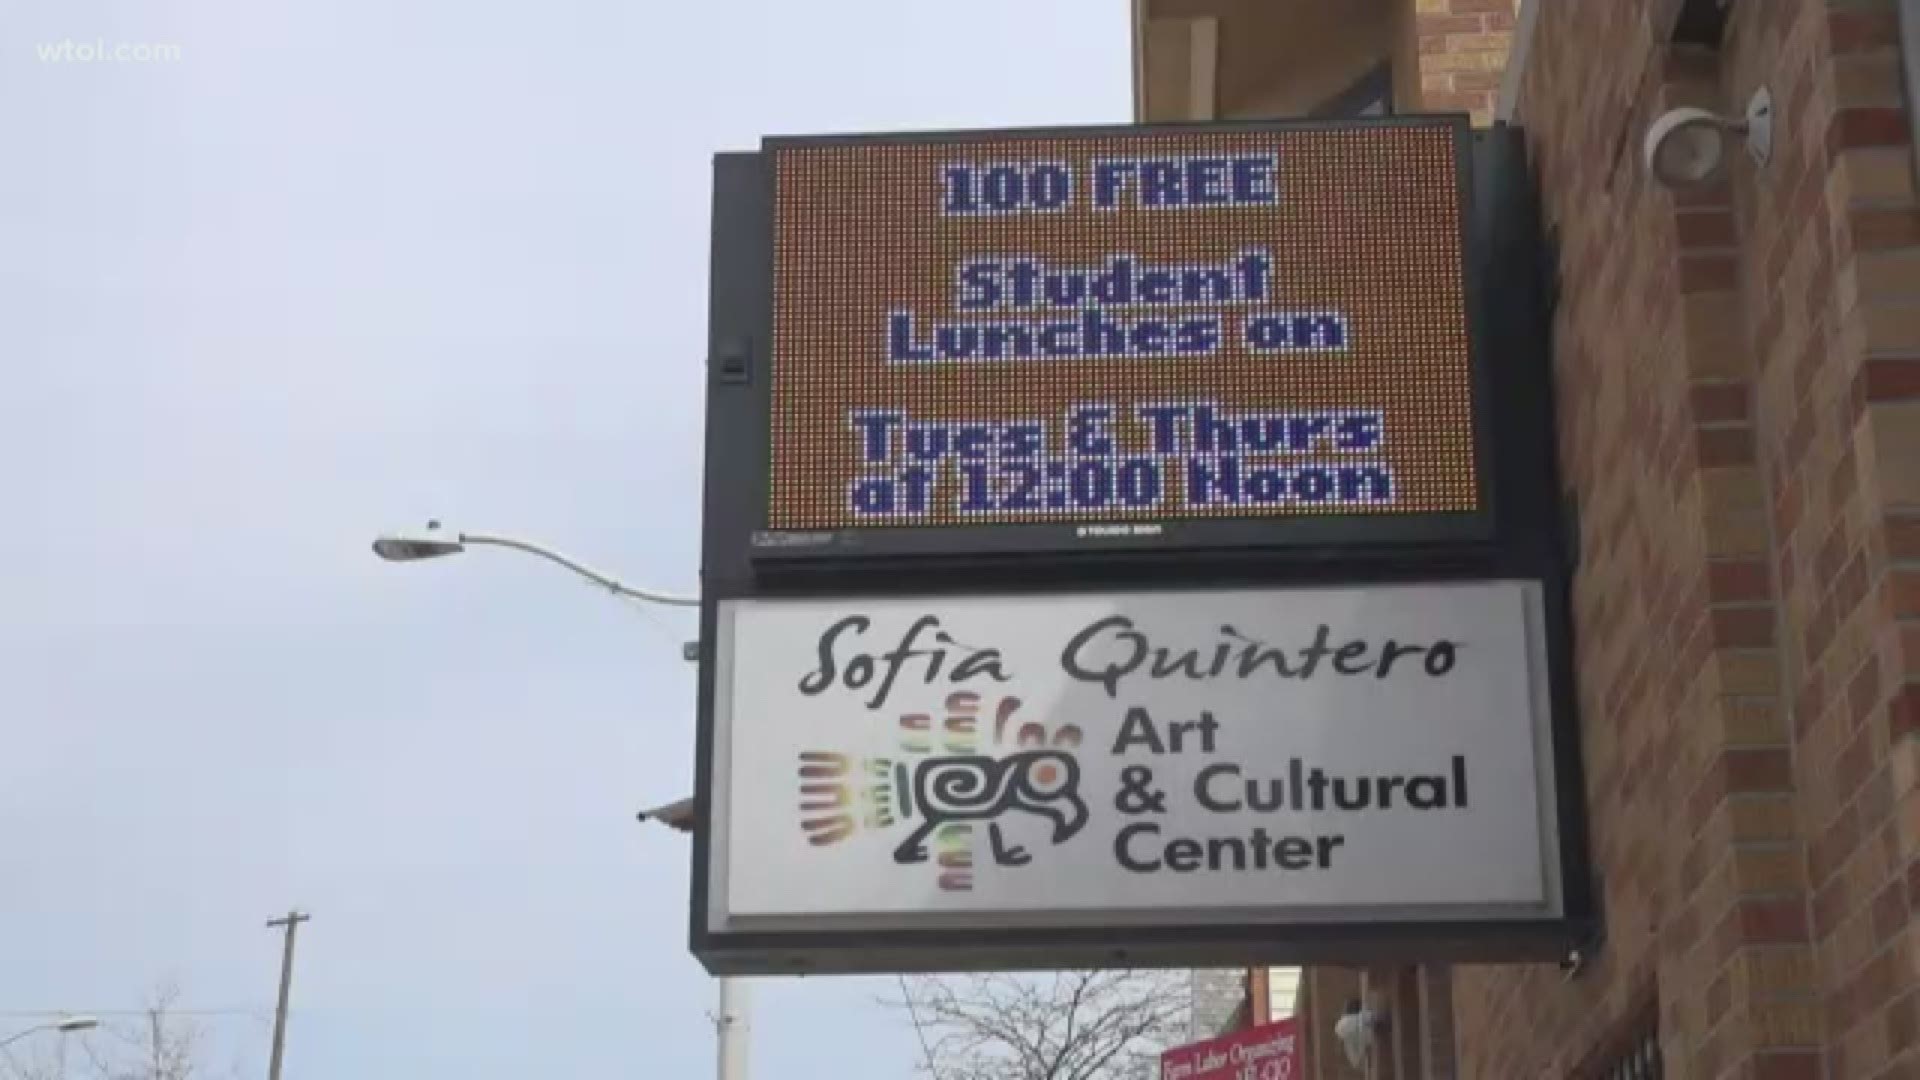 Sofia Quintero Art and Cultural Center jumps in to help feed the Old South End Toledo students